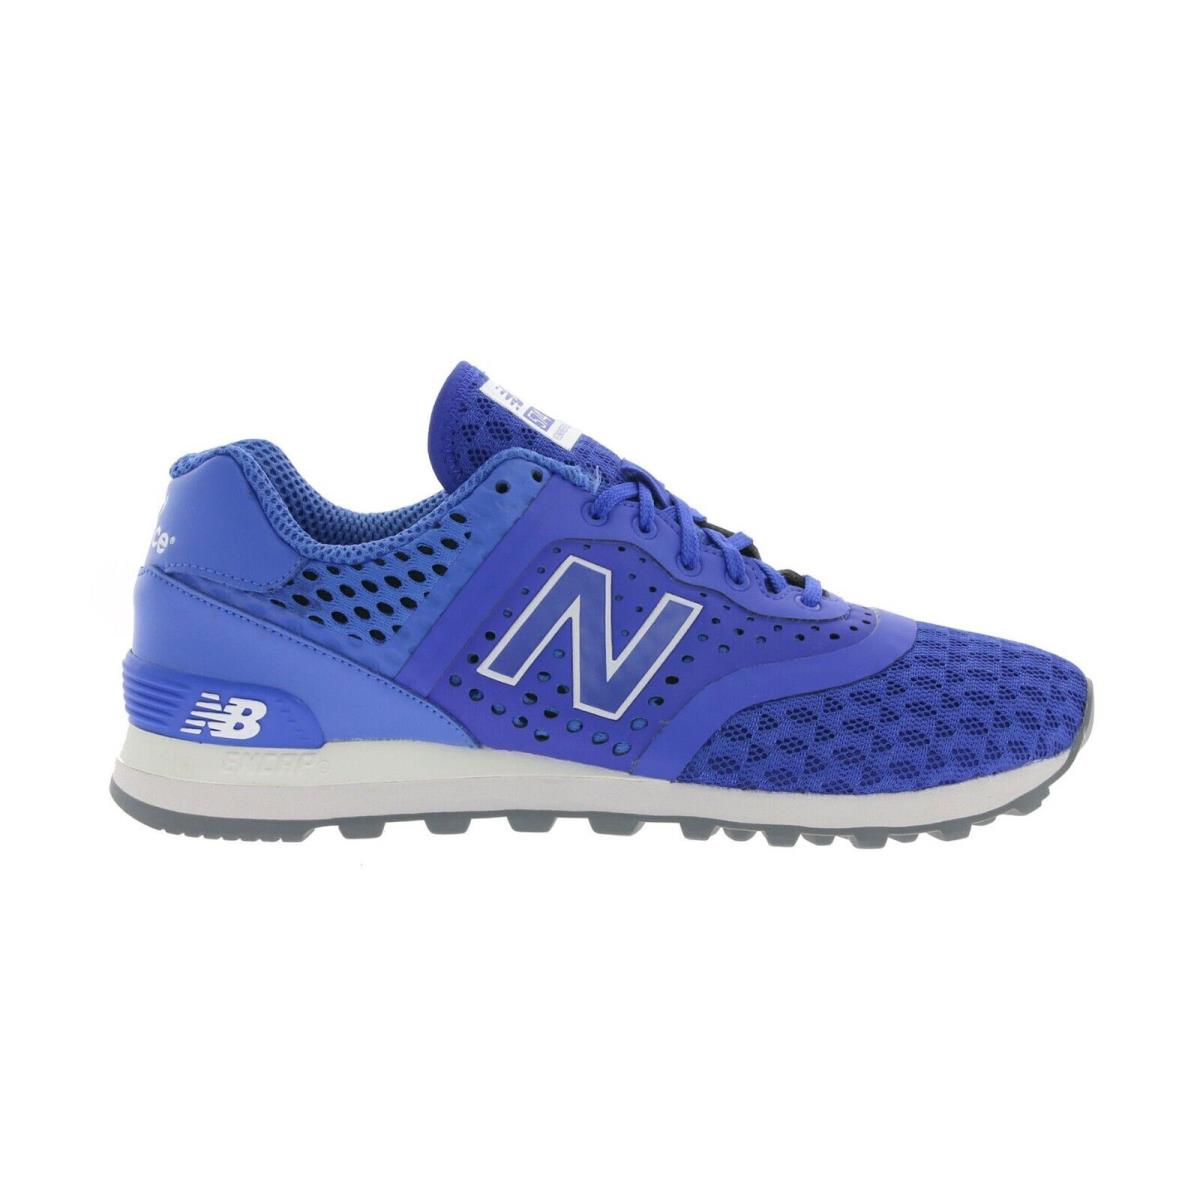 New Balance 574 Men`s Lifestyle Reengineered Shoes Sneakers MTL574CZ - Blue - Blue